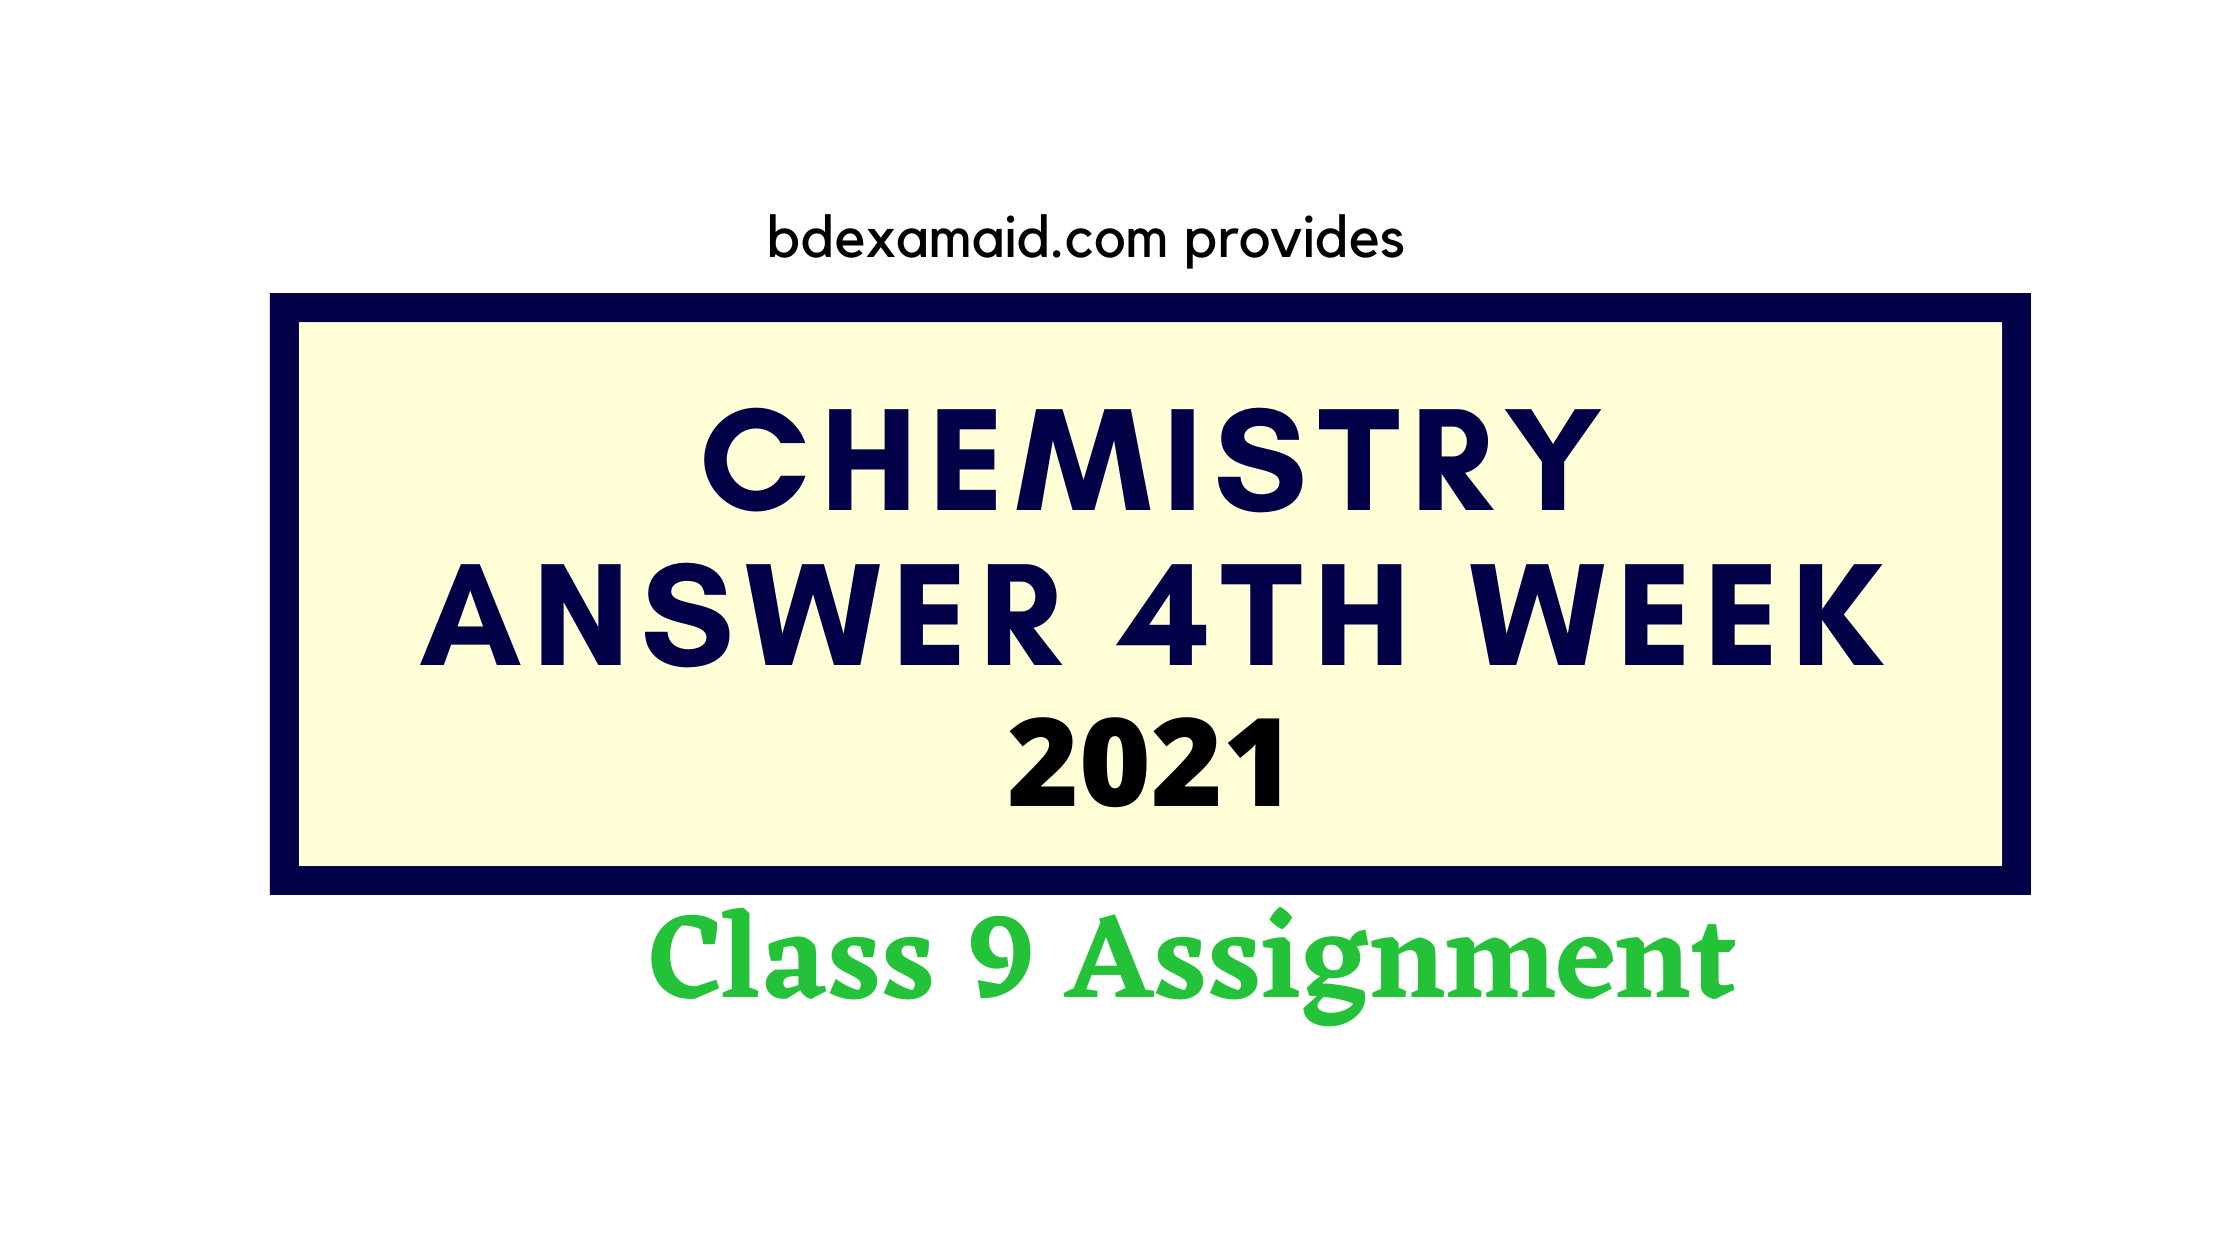 chemistry assignment class 9 4th week